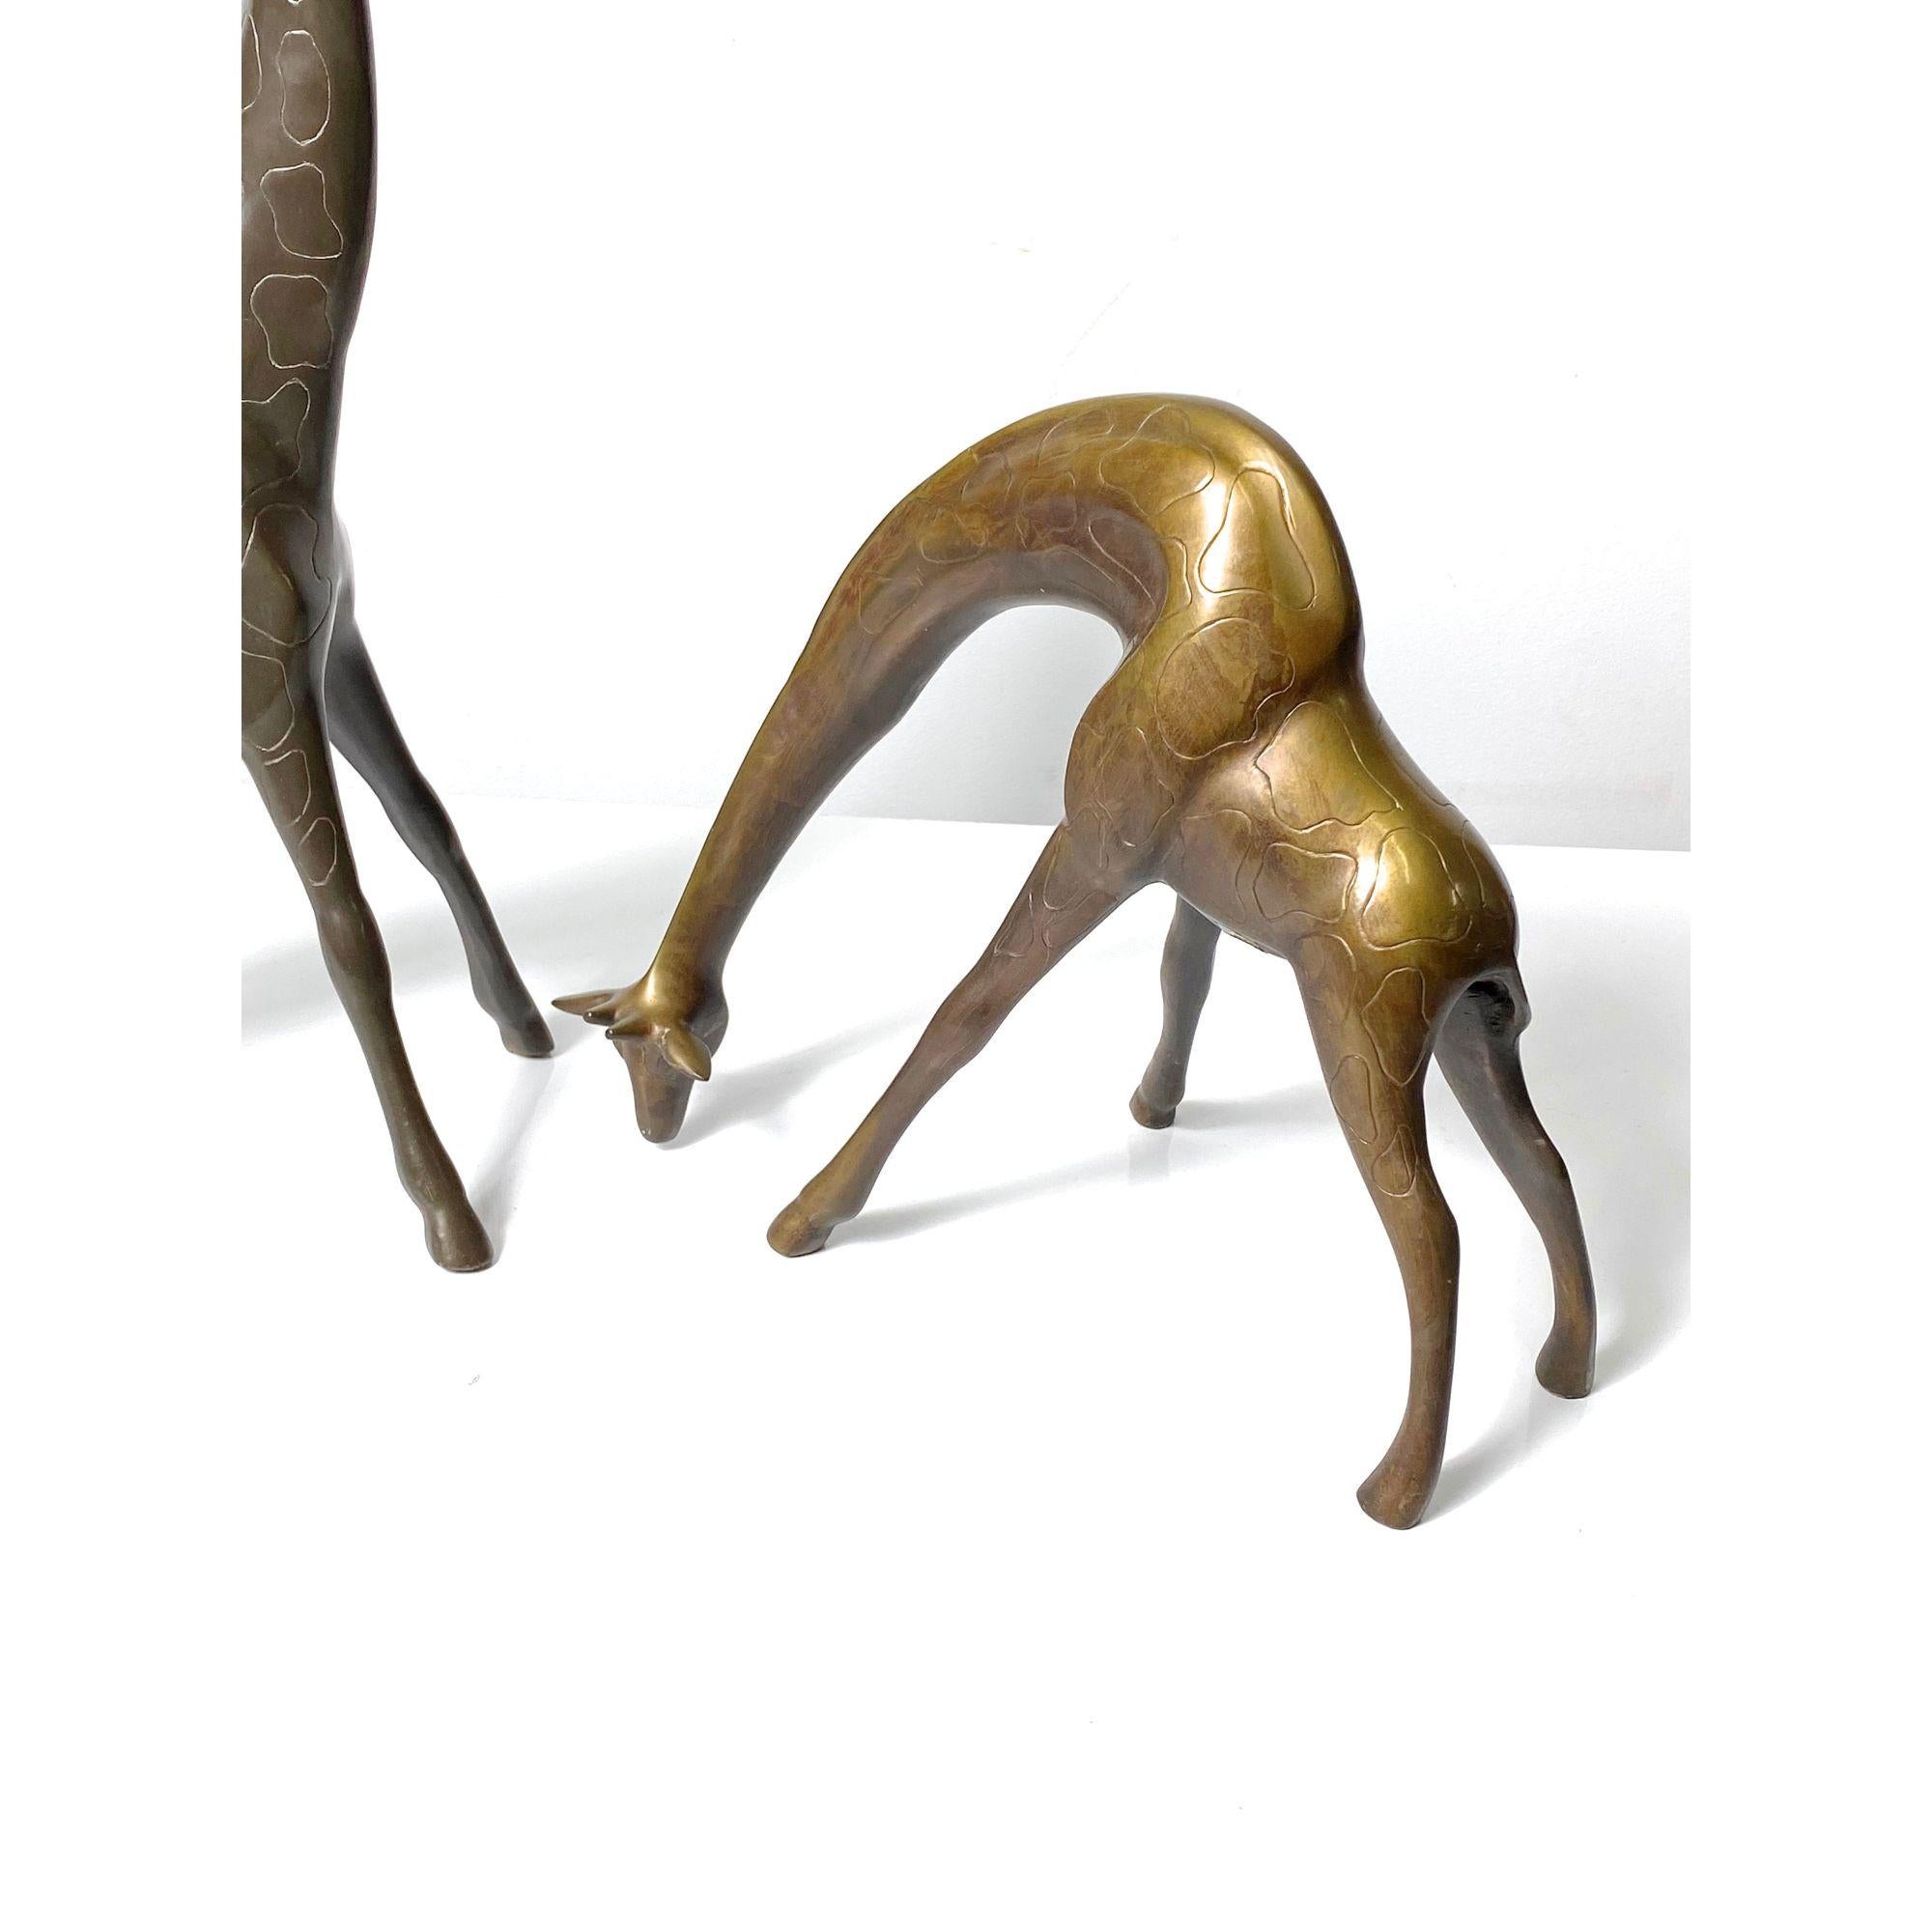 20th Century Pair of Vintage Giraffe Sculptures in Bronze and Brass, circa 1970s For Sale